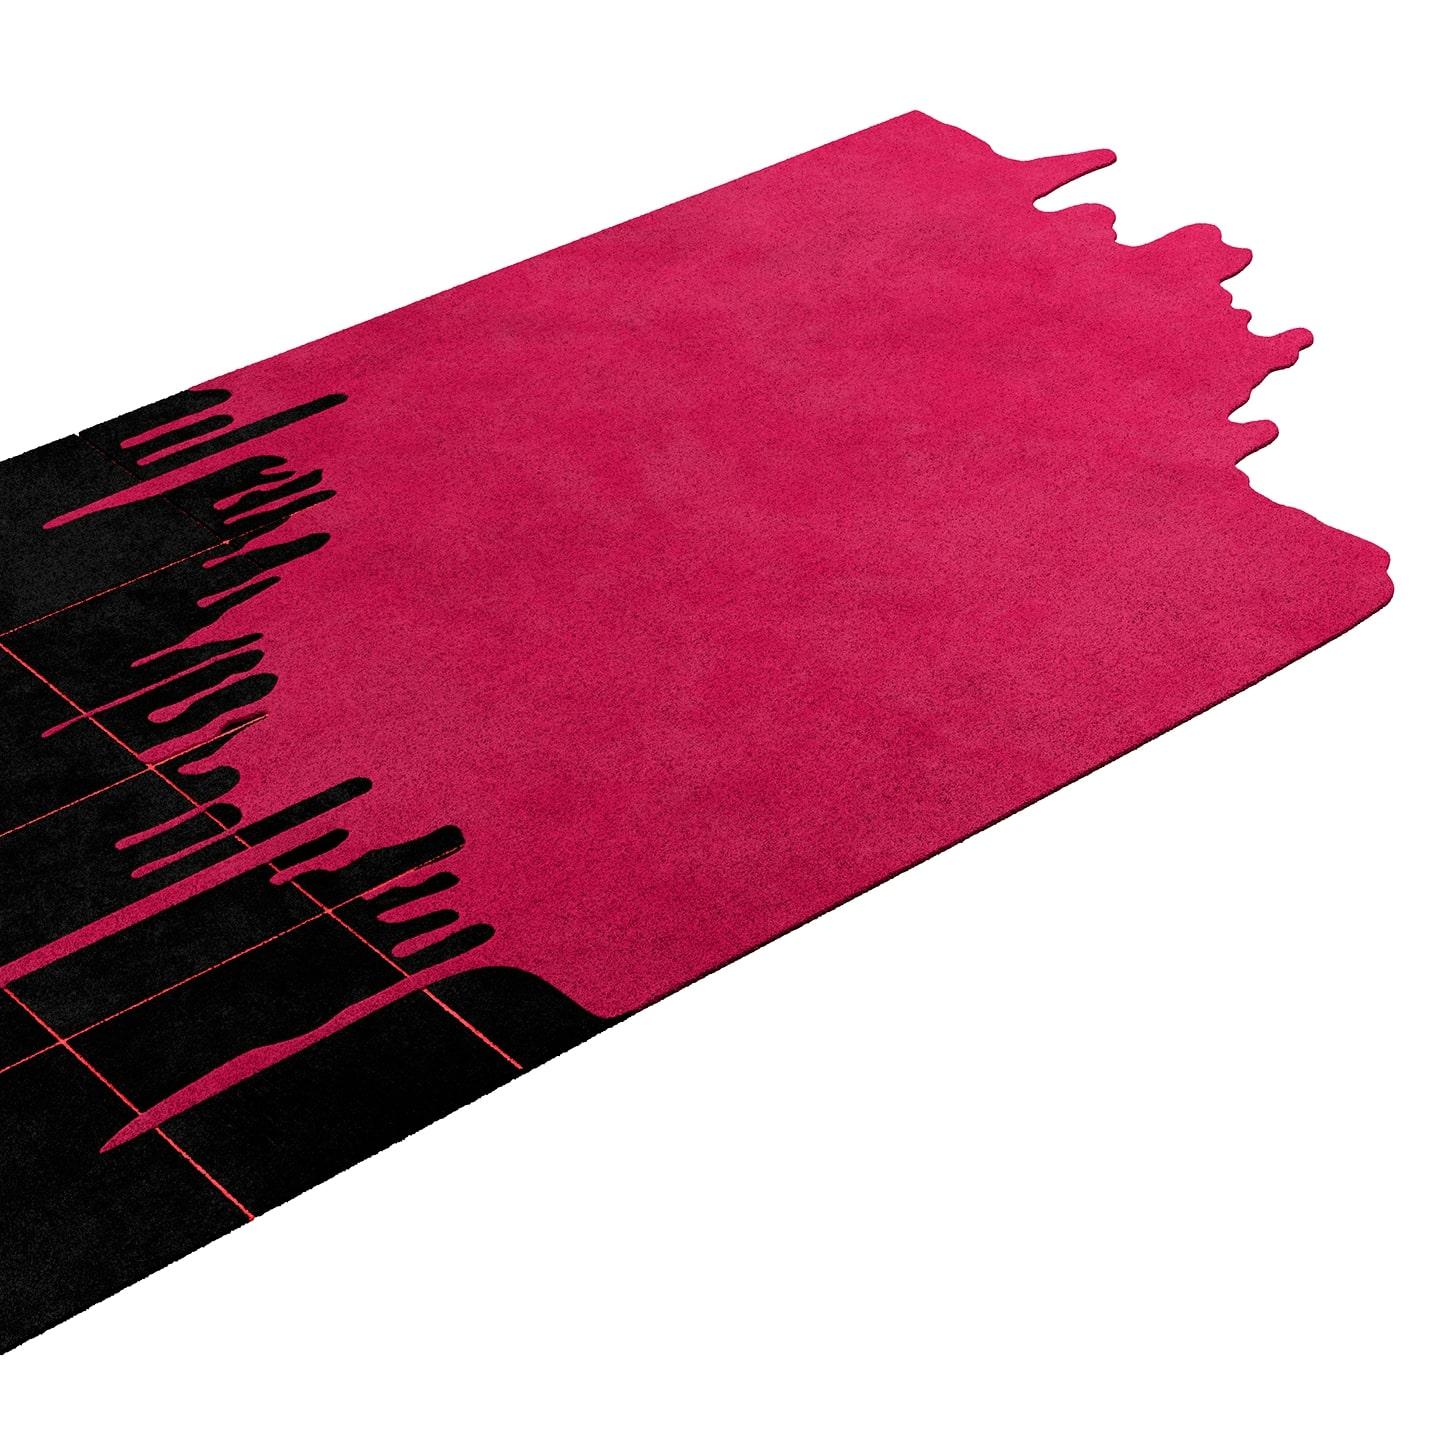 Modern Rectangular abstract shape hand-tufted rug pink & black

Tapis Shaped #056 is a black and pink rug part of a collection of trendy rugs with contemporary flair for timeless interiors.
With vibrant aesthetics and whimsical hues, this modern